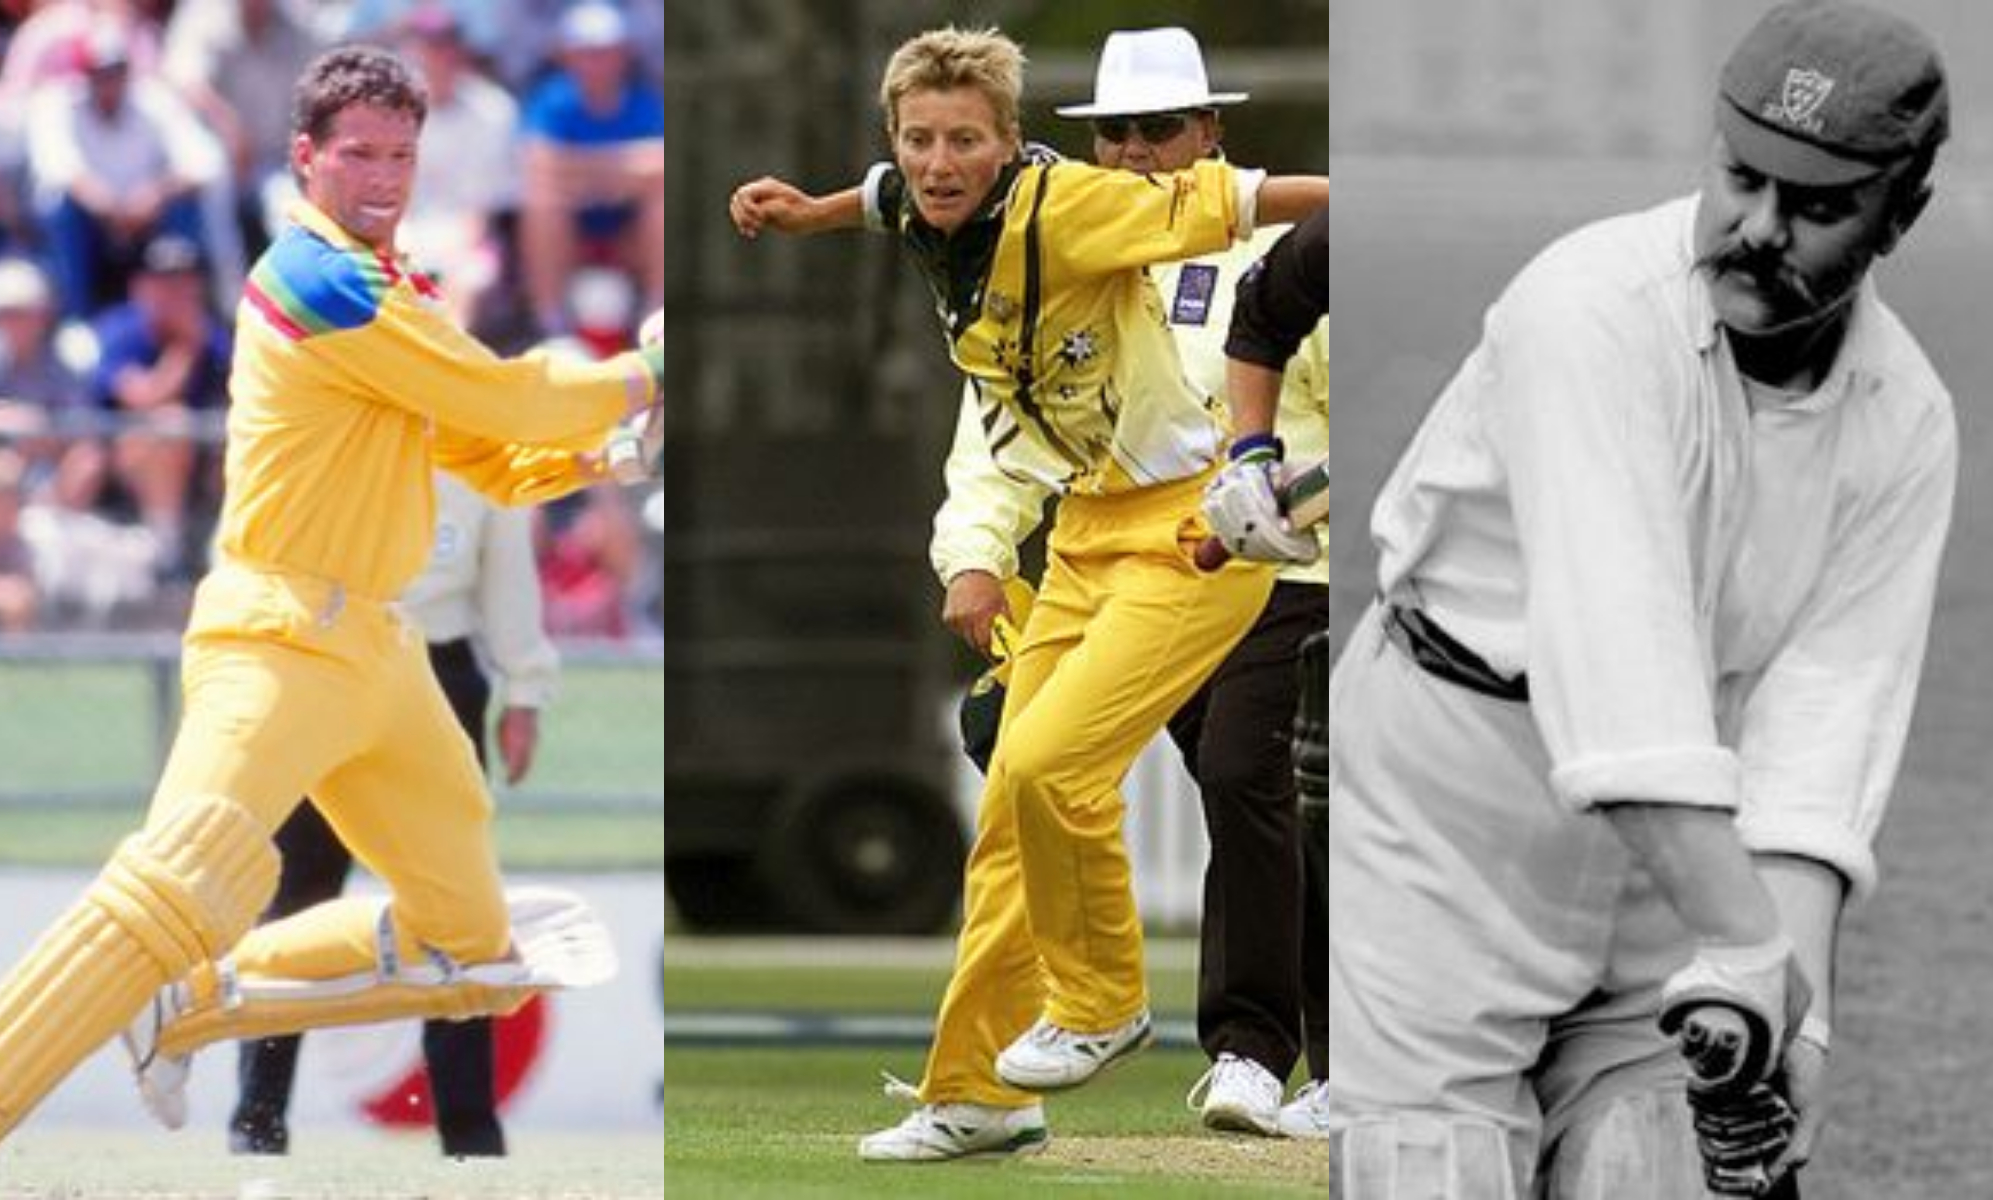  Dean Jones, Billy Murdoch, and fast bowler Cathryn Fitzpatrick inducted into the Australian Cricket Hall of Fame